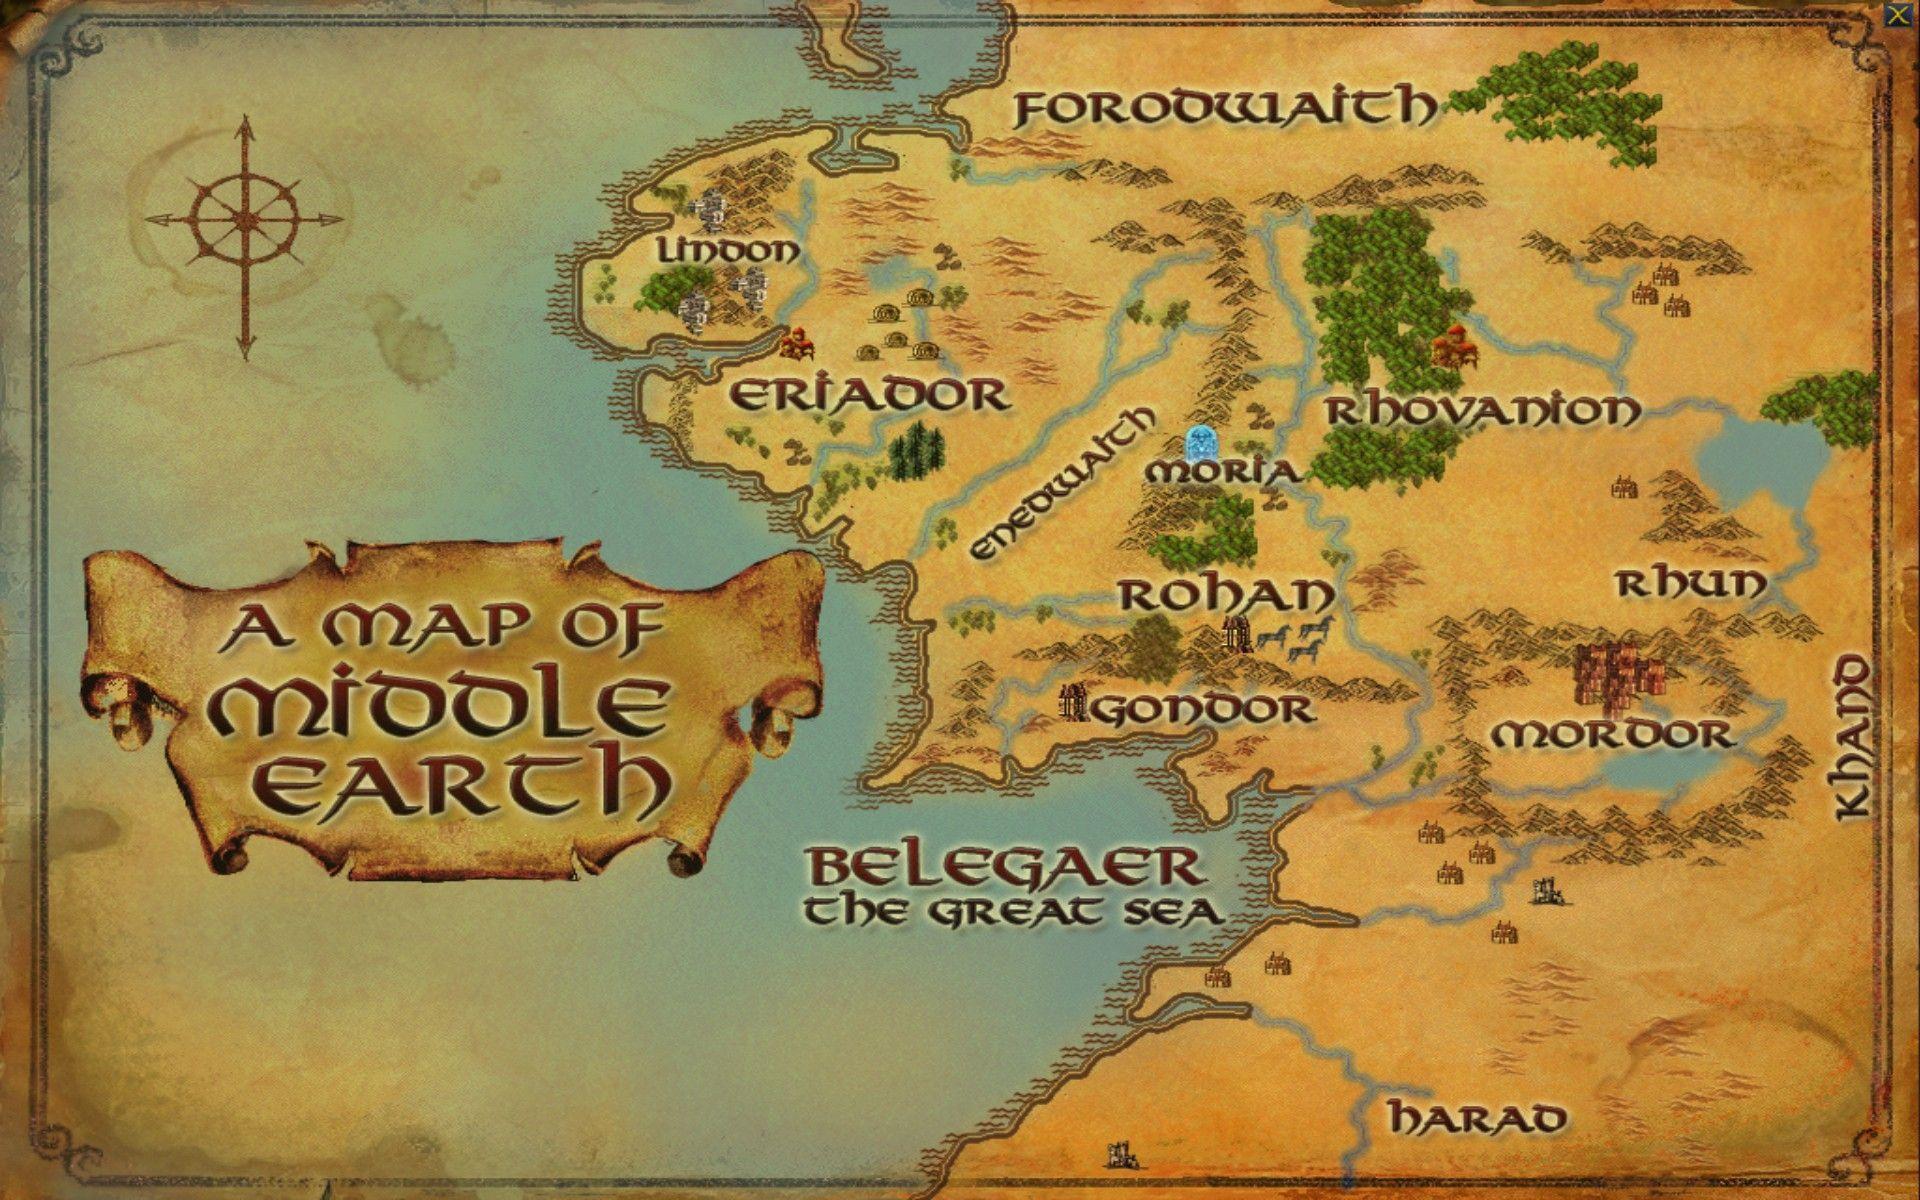 New Map of Middleearth for lotro?